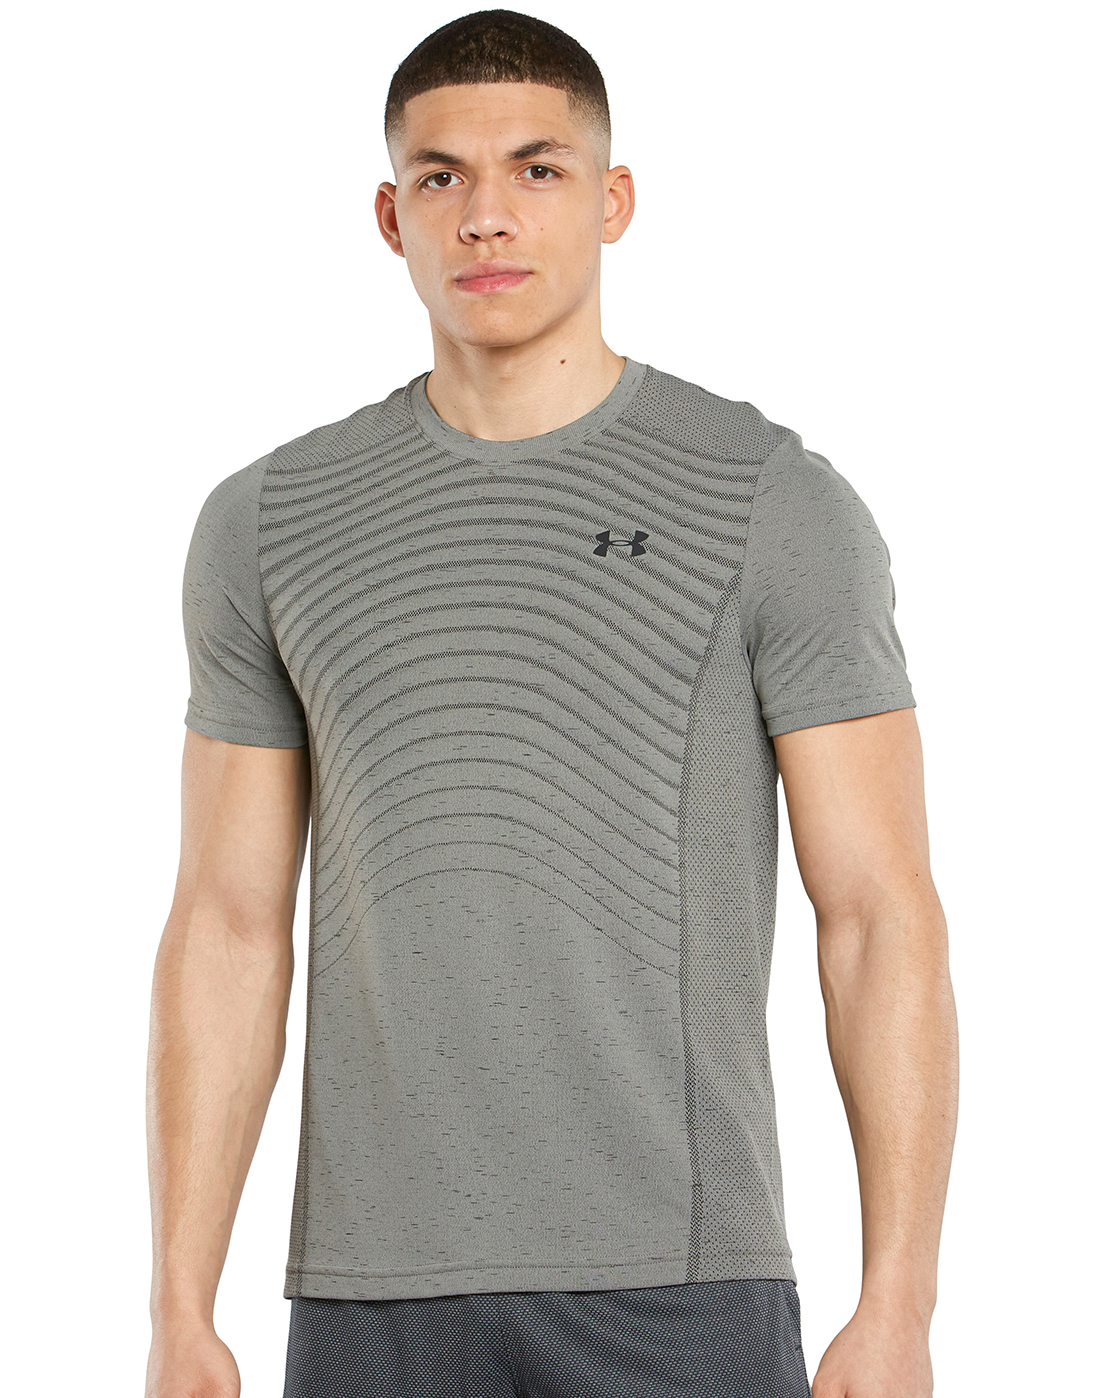 Under Armour Mens Seamless Wave T-shirt - Green | Life Style Sports IE